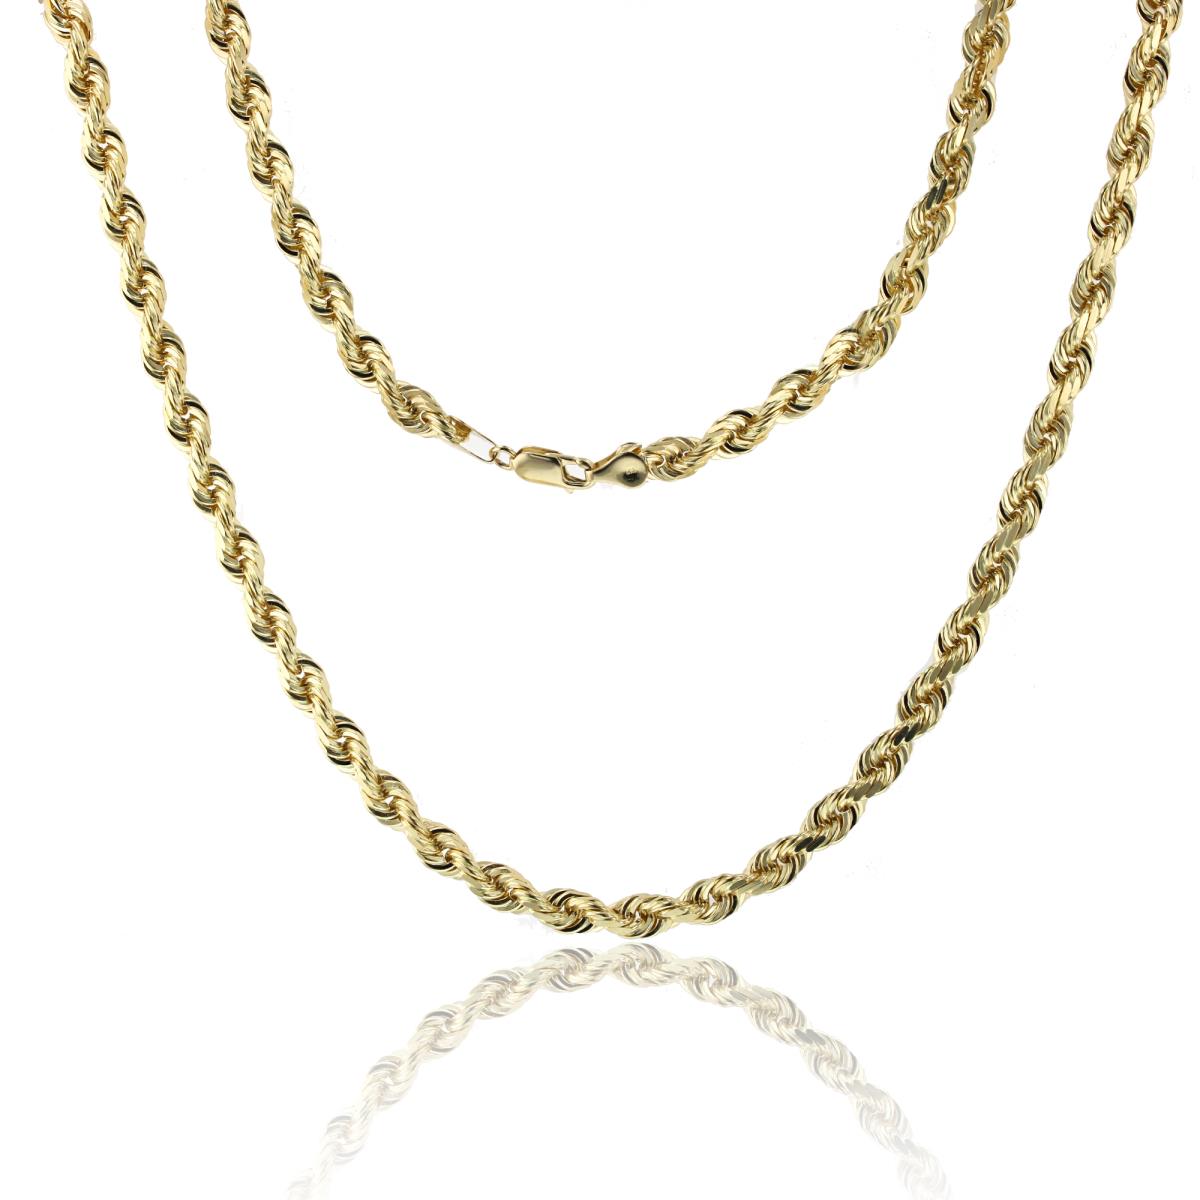 10K Yellow Gold Solid DC Rope 080 32" Chain